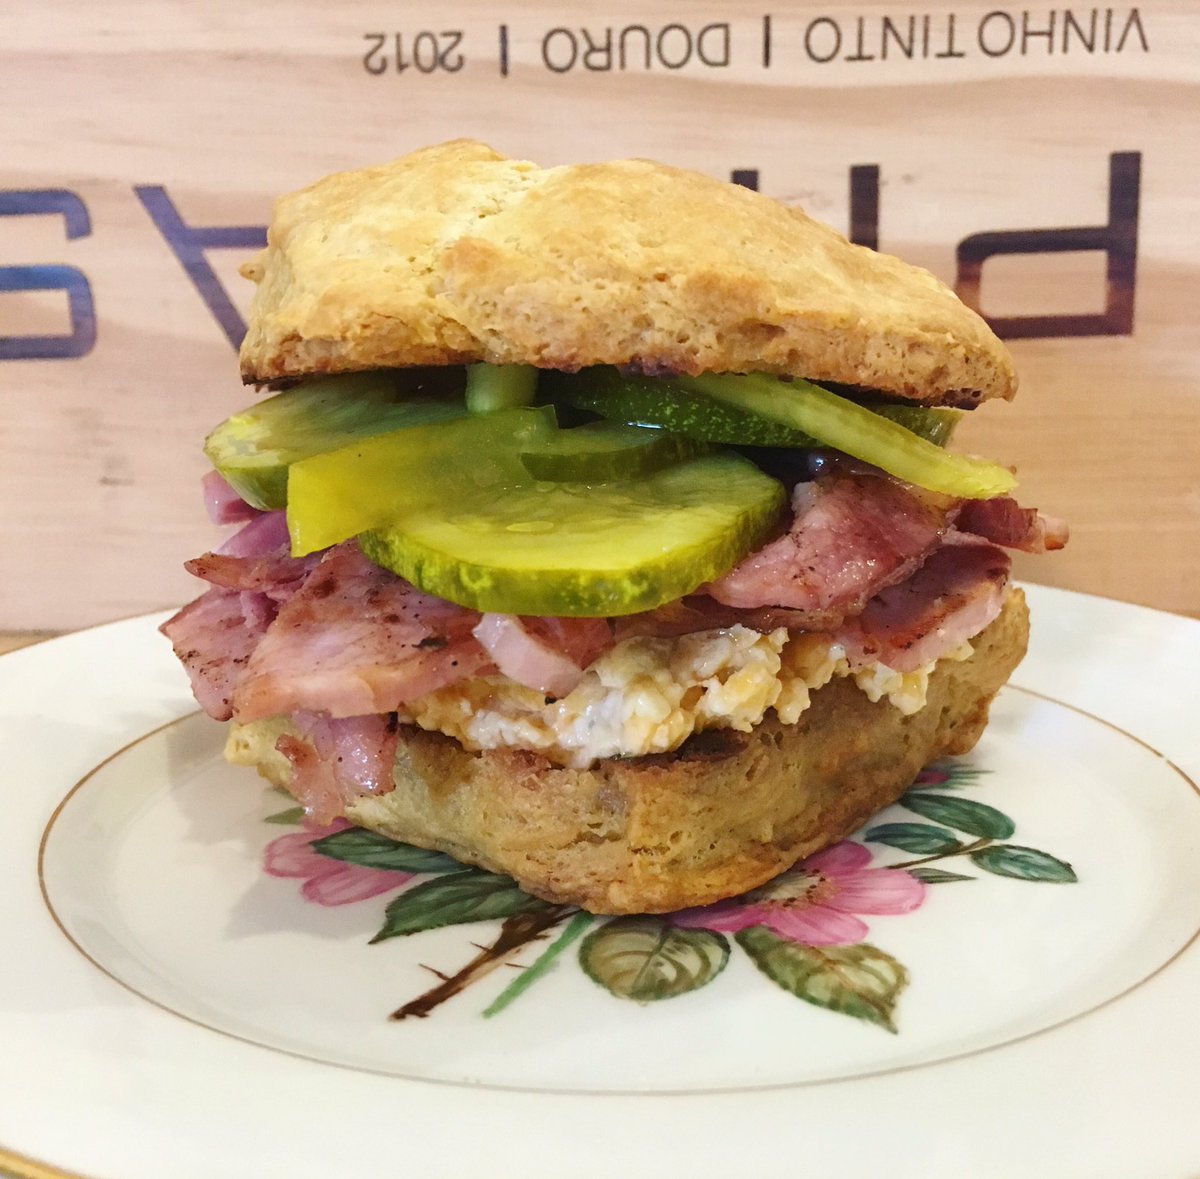 Making breakfast all day! Come try one of our homemade biscuit sandwiches. 📸: buttermilk with roasted carved turkey, pimento, and house pickles. 🙌

#rva #rvadine #rvafood #rvafoodie #breakfast #breakfastfordinner #richmond #travel #foodphotography #biscuit #buttermilkbiscuits